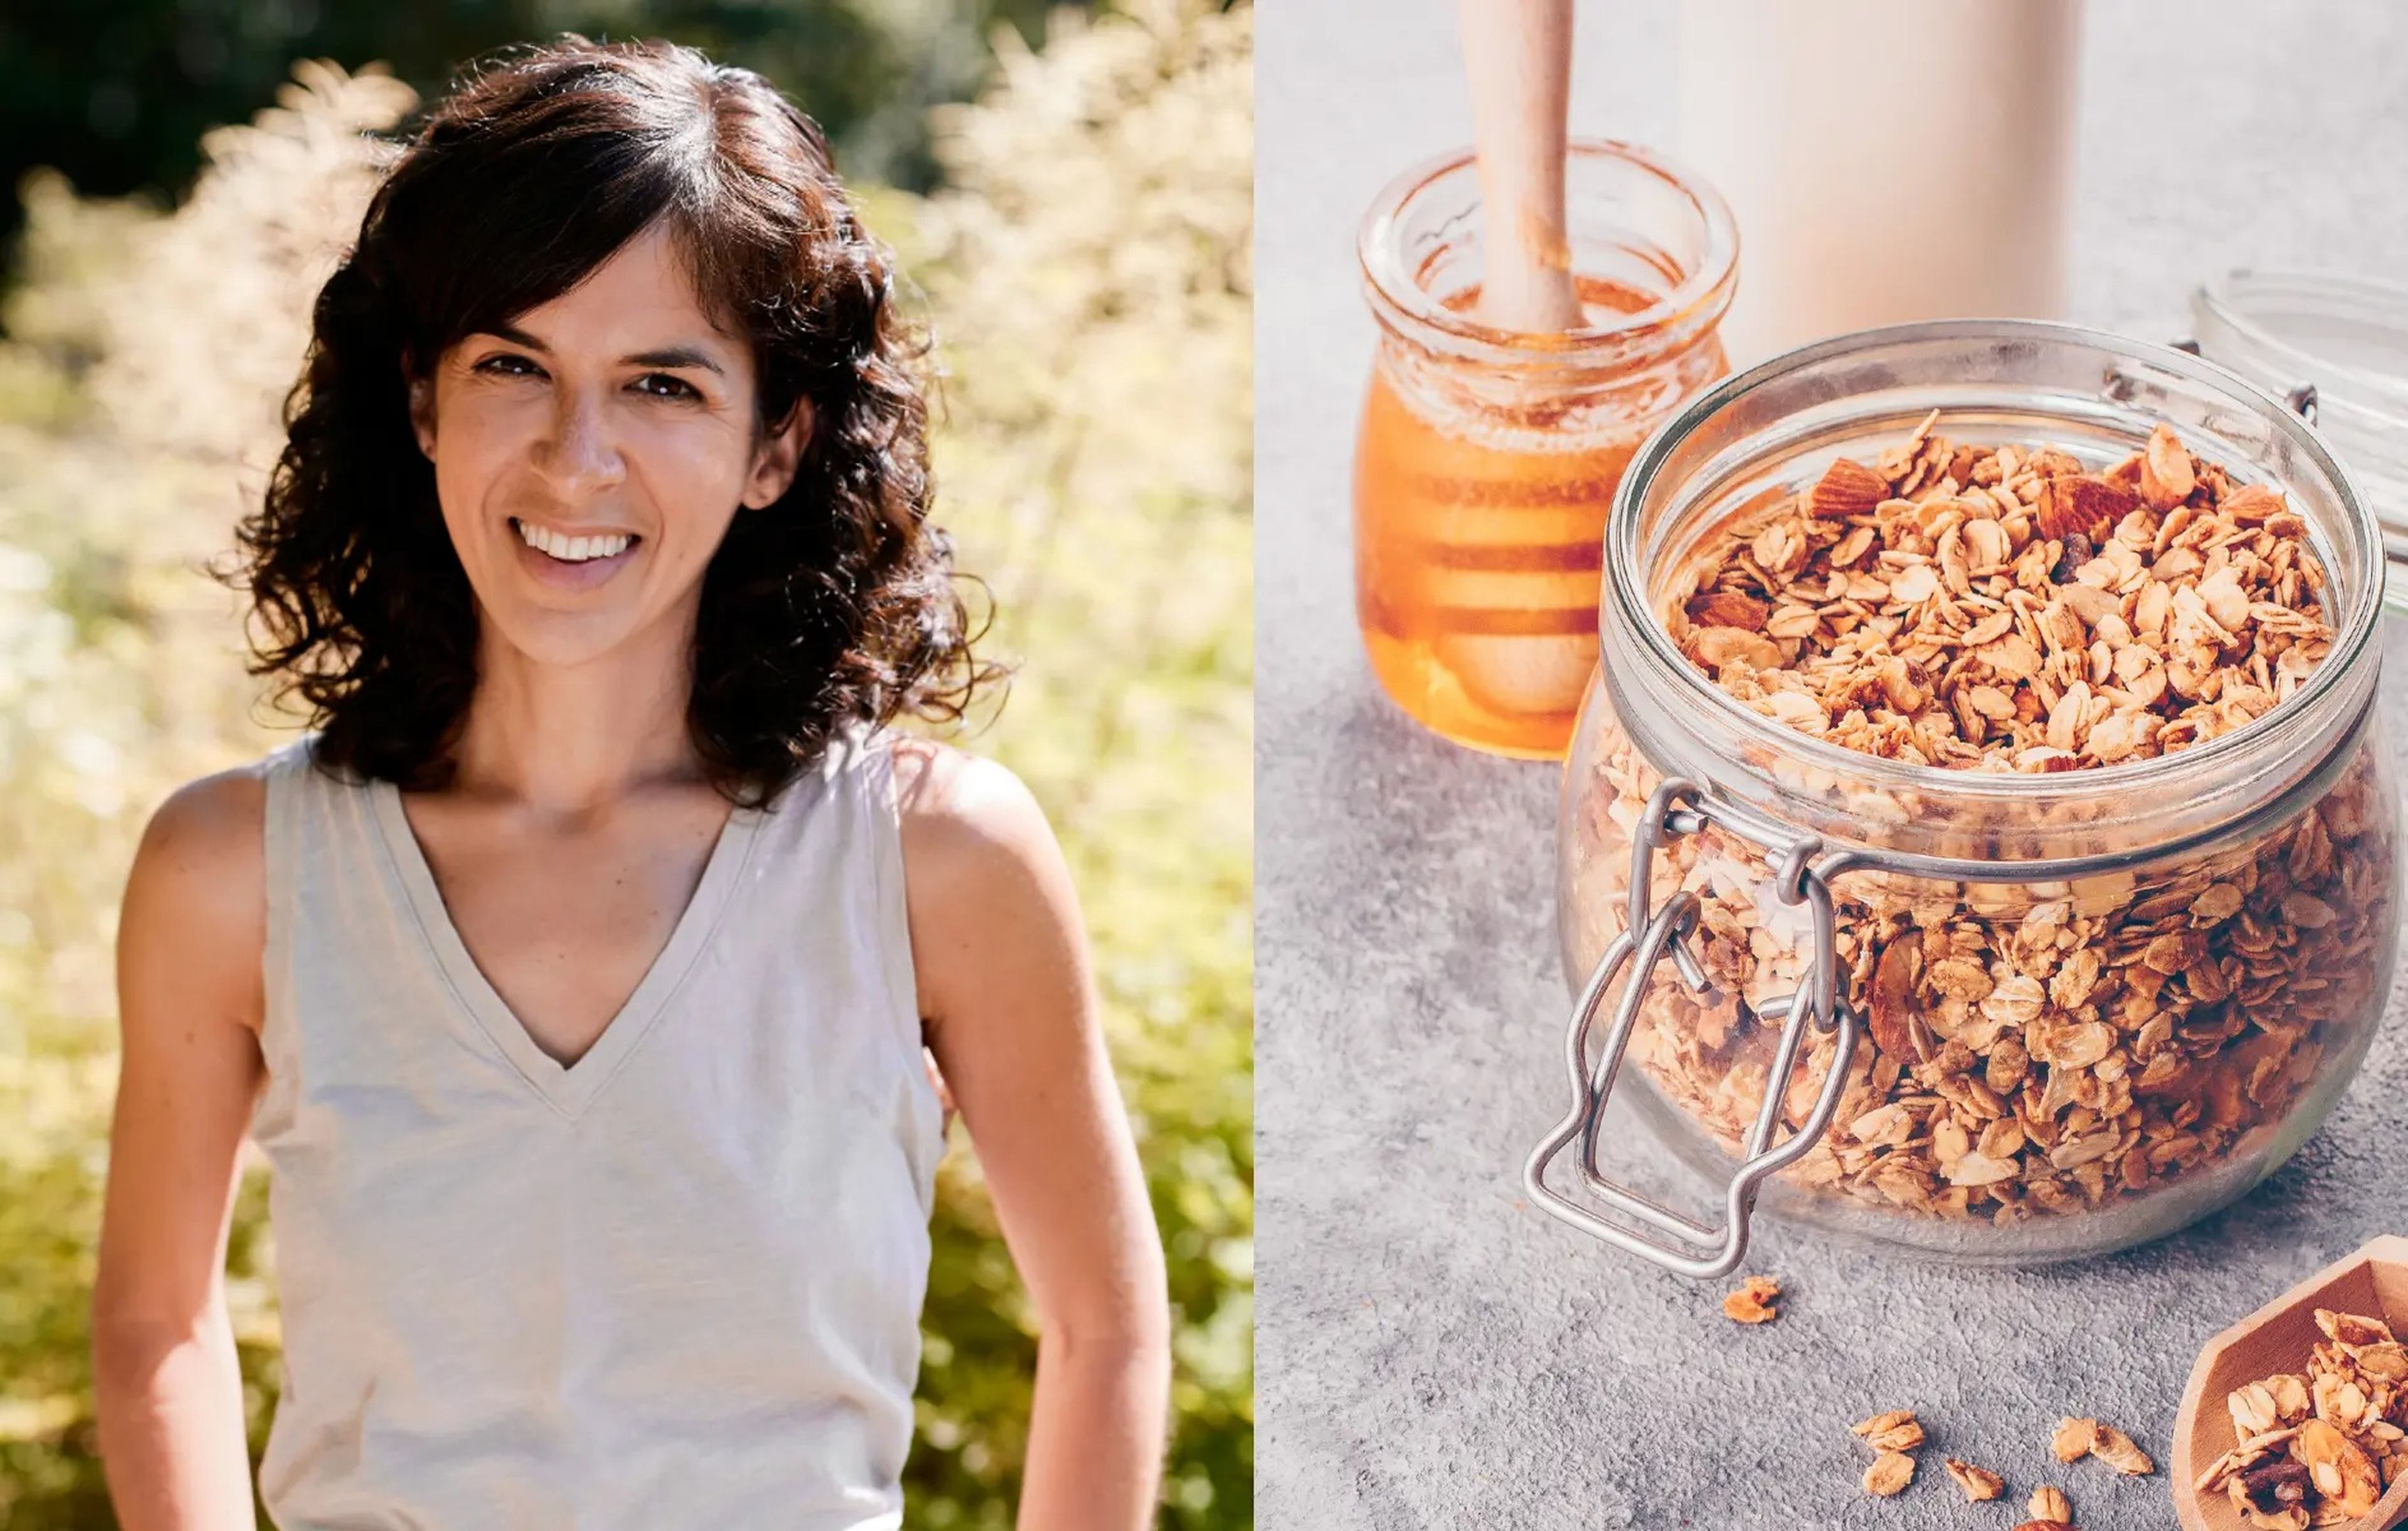 A split image showing a profile picture of dietitian Sheela Prakash and a glass jar of homemade granola with honey.